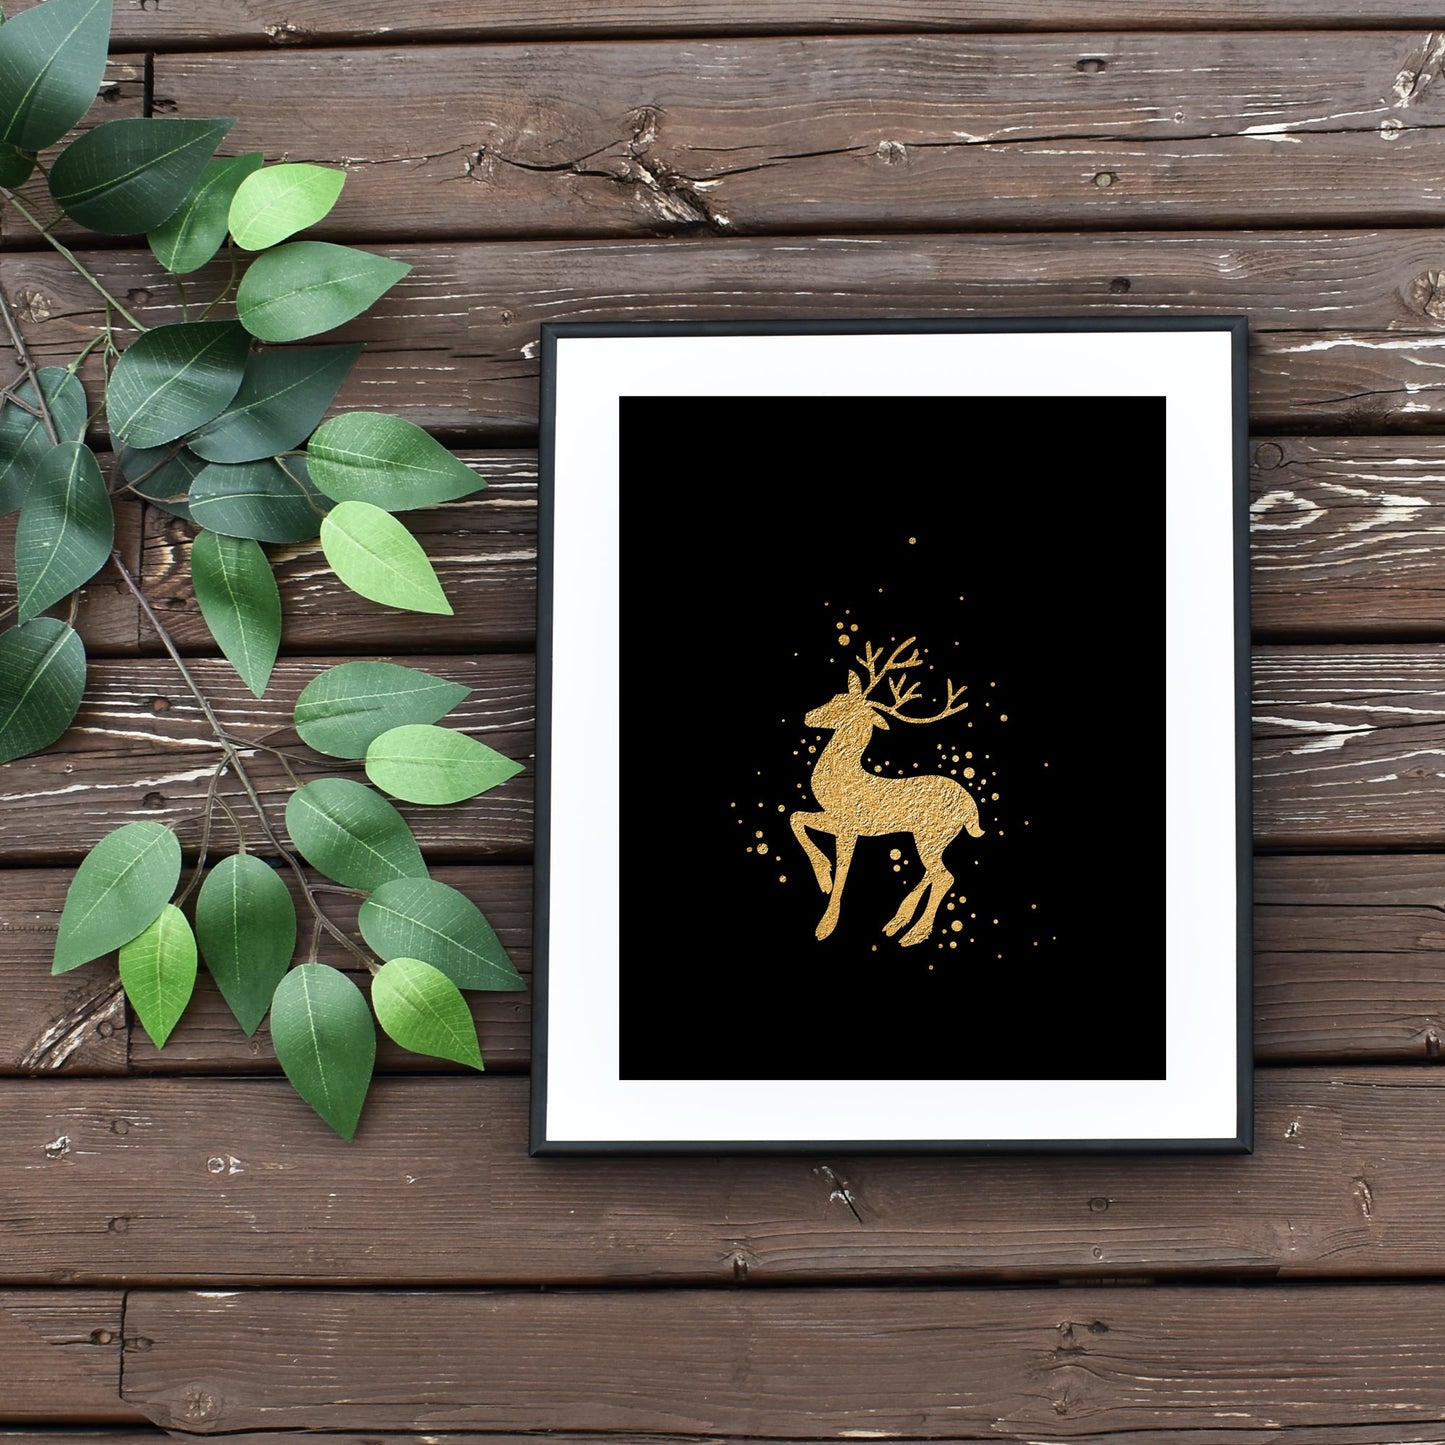 Quick Downloadable Black and Gold Reindeer Wall Art Christmas Decor on a budget